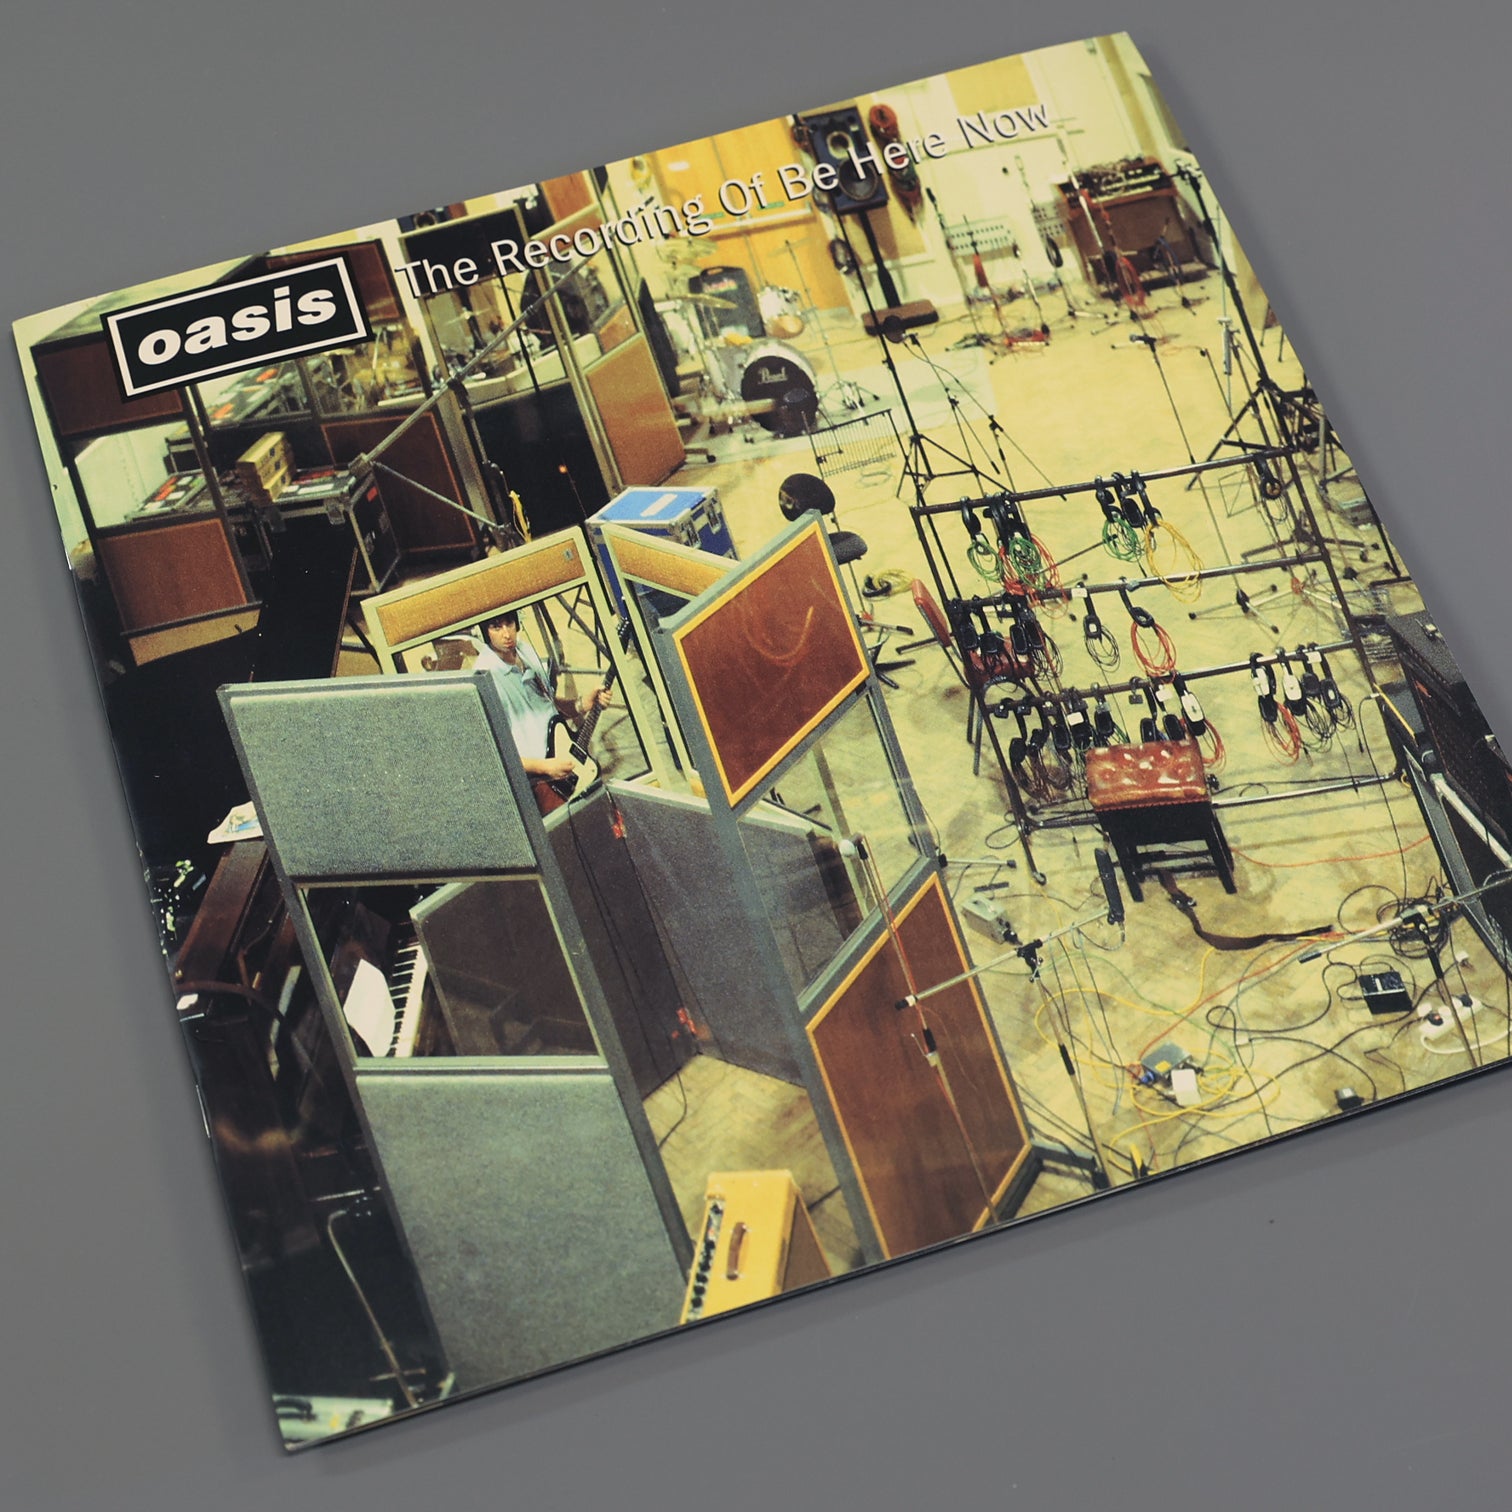 Oasis - Be Here Now - The Making Of Booklet - New Item